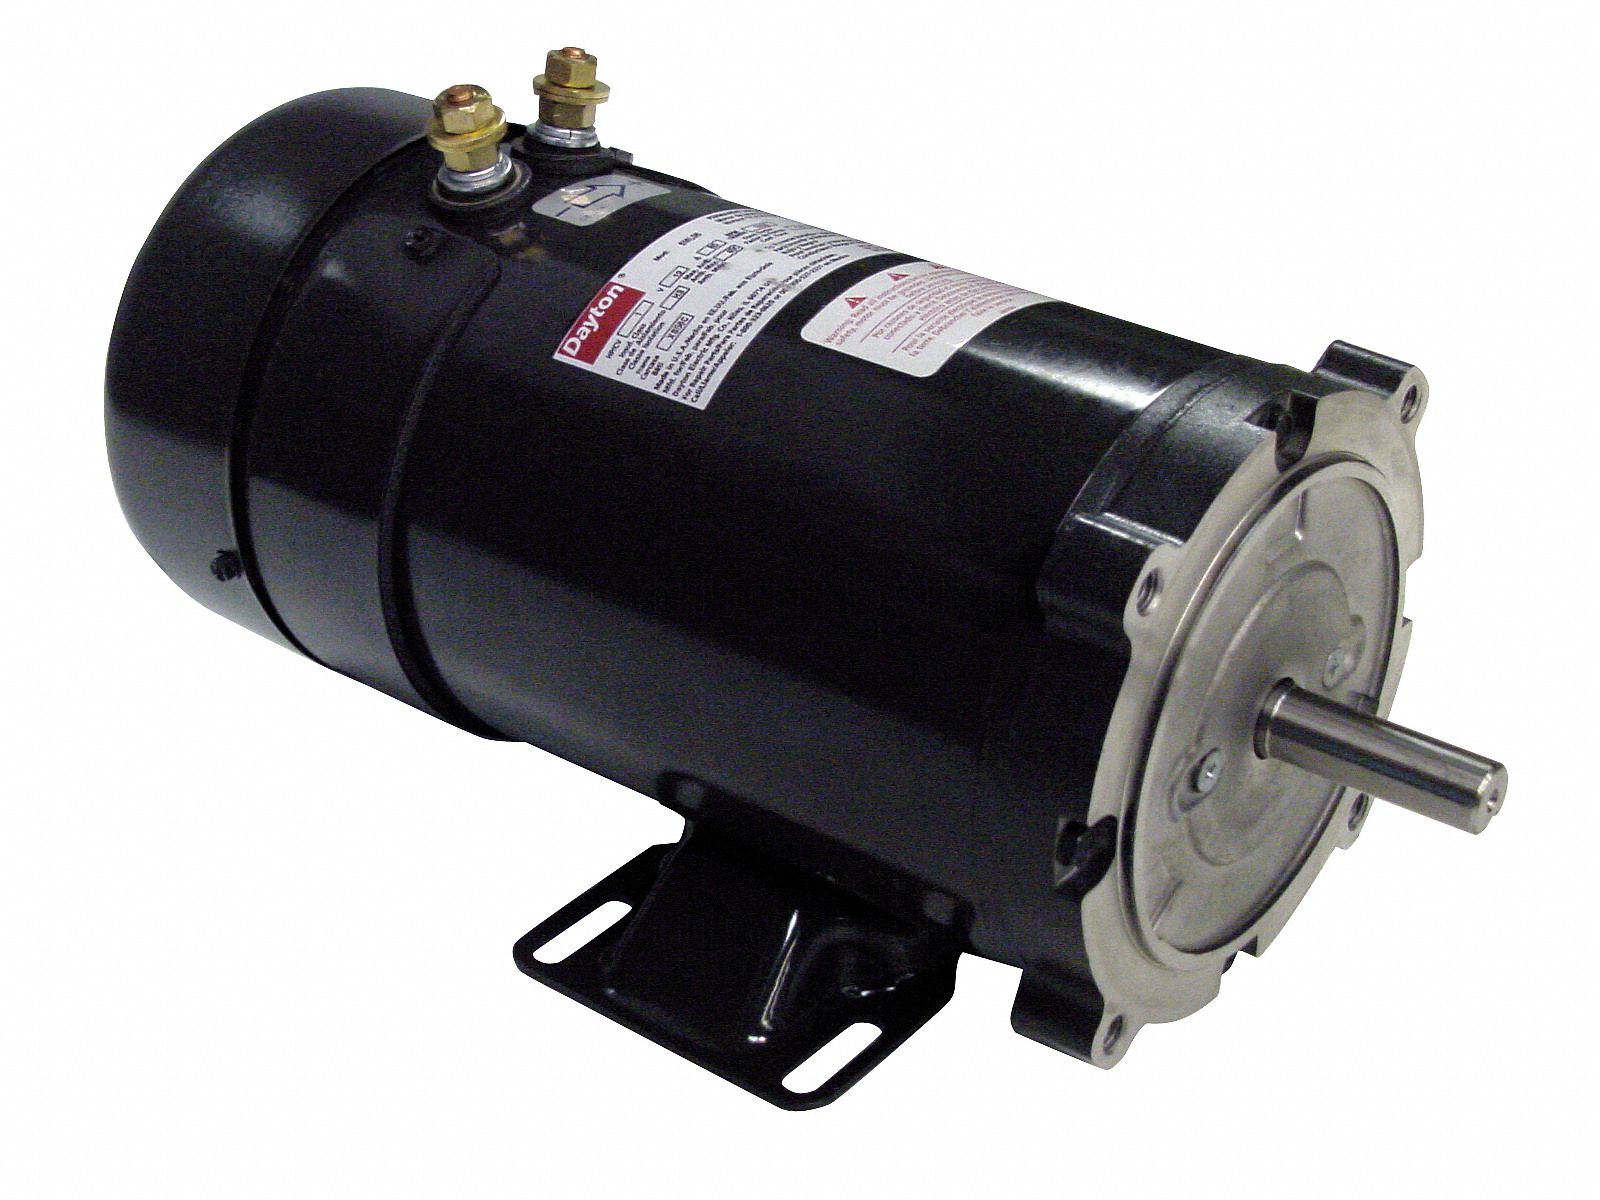 Imperial Electric P66SR247 Permanent Magnet Motor 1.5 HP 50/60 Hz